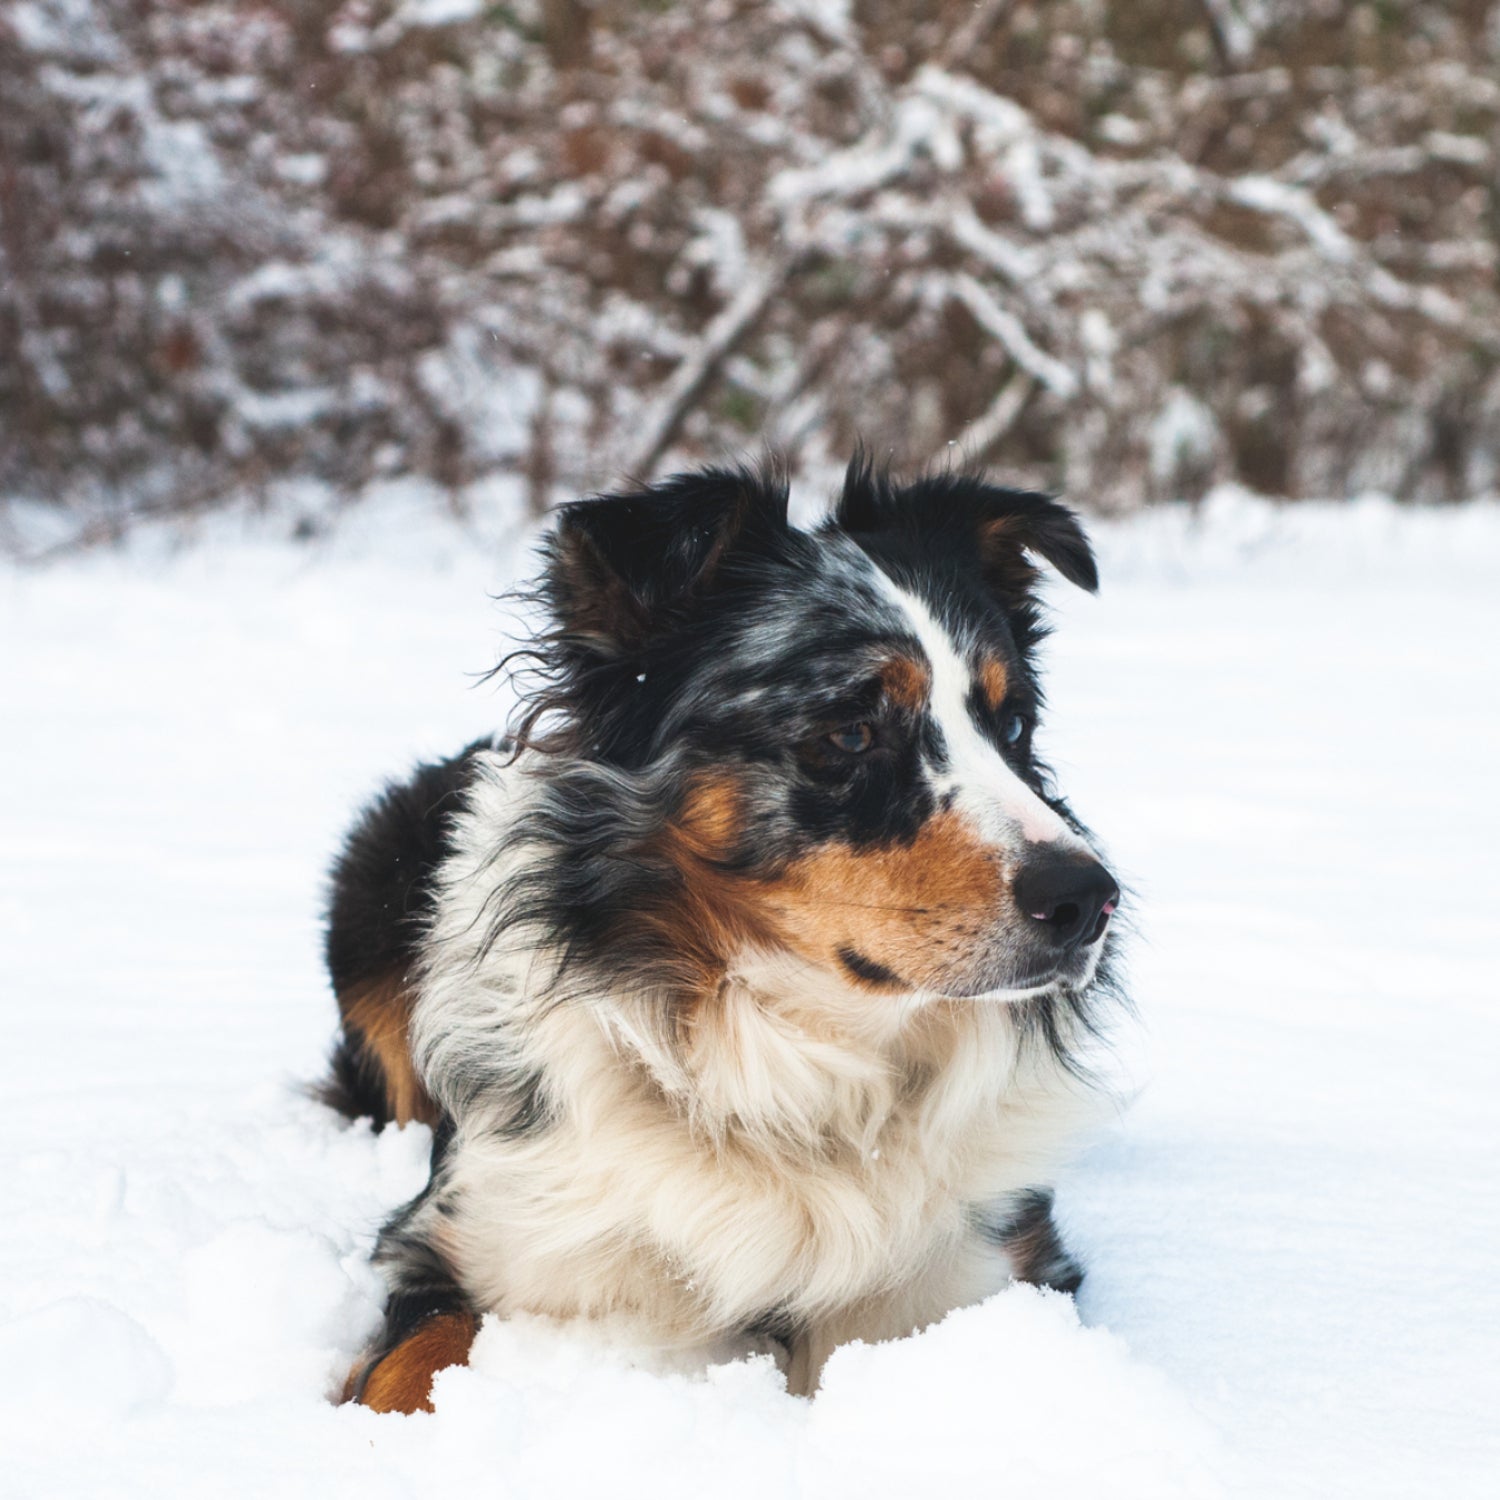 An Australian shepherd with black, brown, and white fur sitting in the snow.